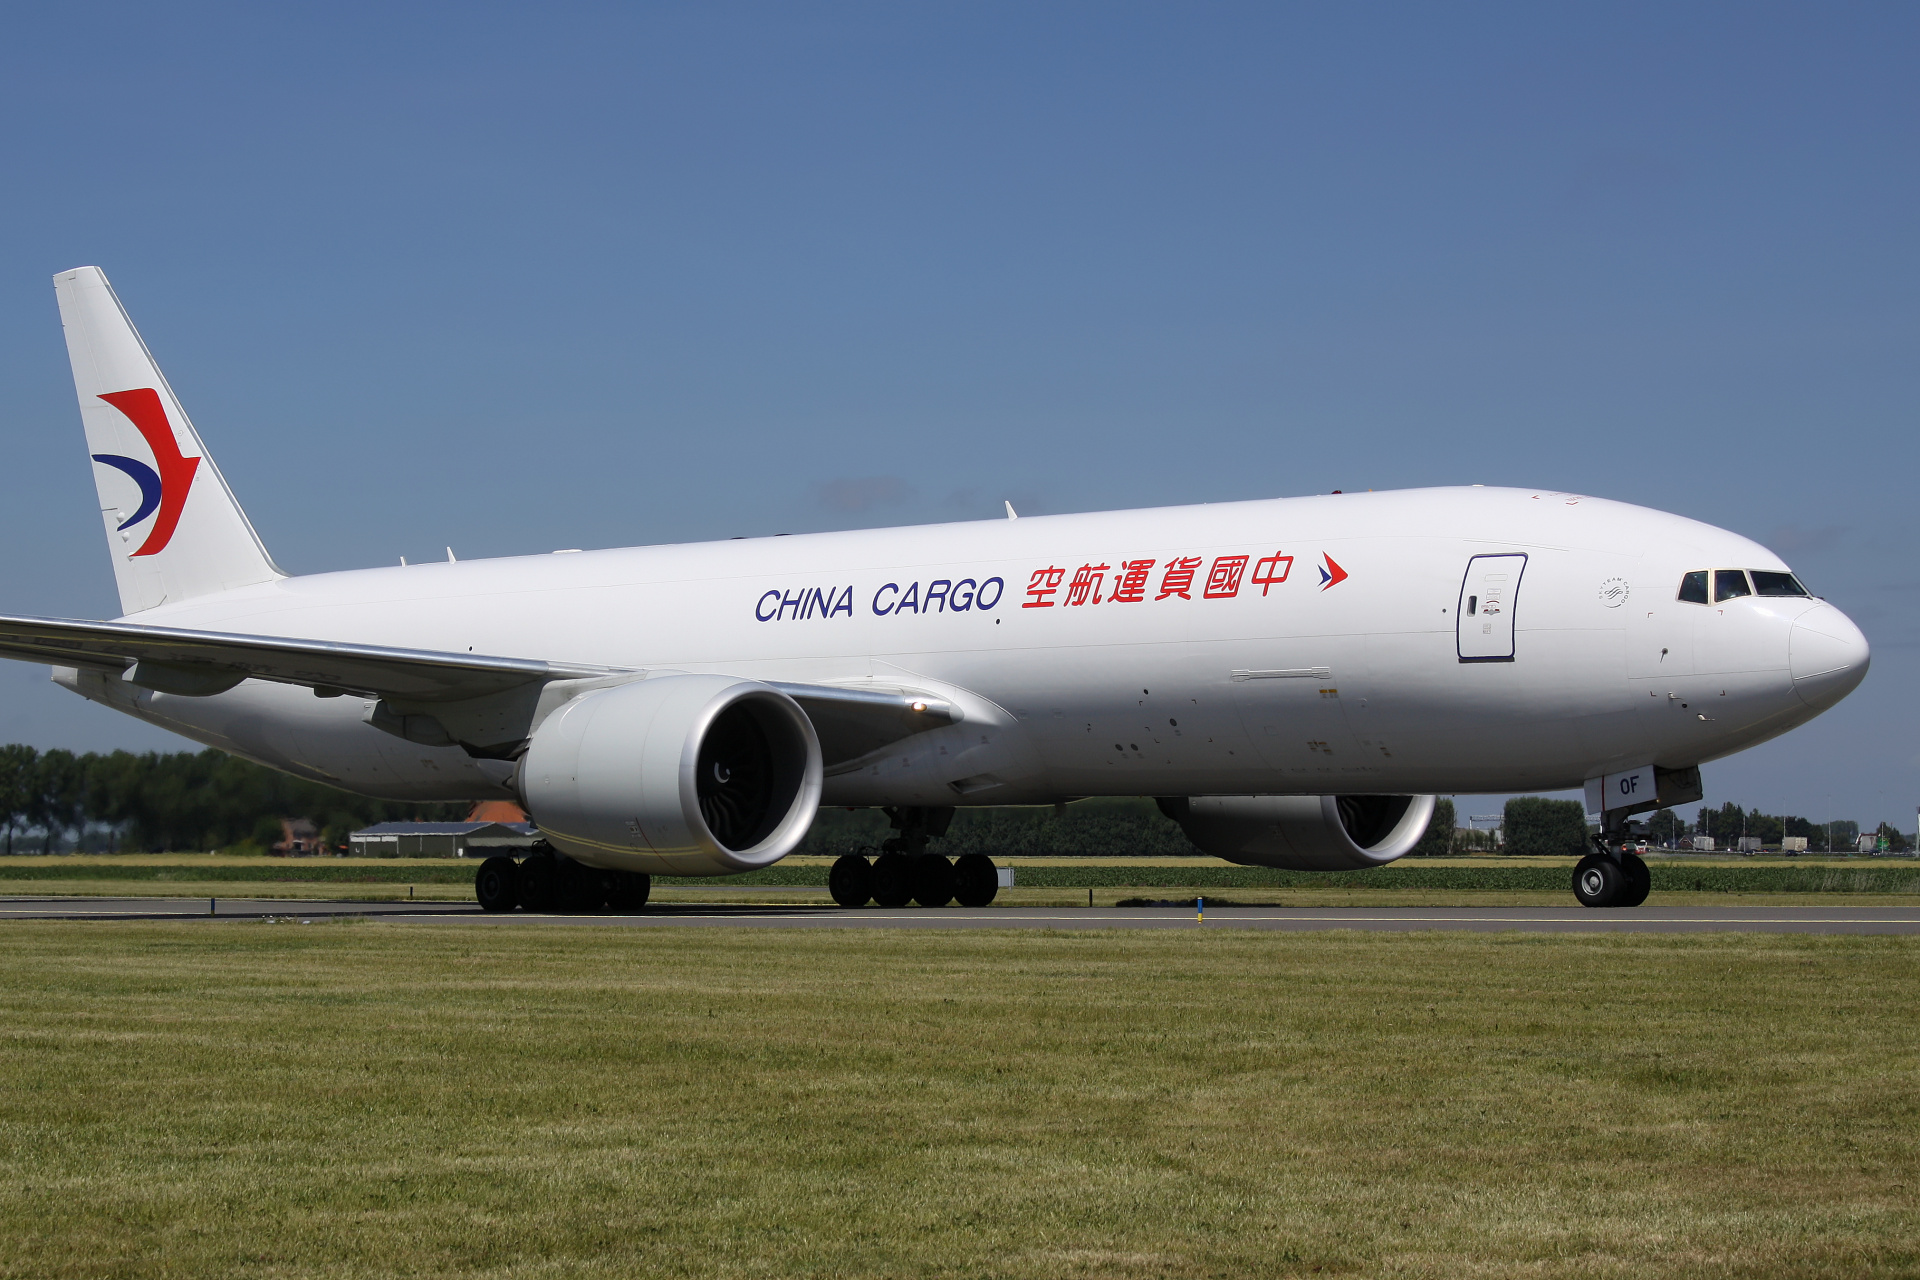 B-220F, China Cargo Airlines (Aircraft » Schiphol Spotting » Boeing 777F)